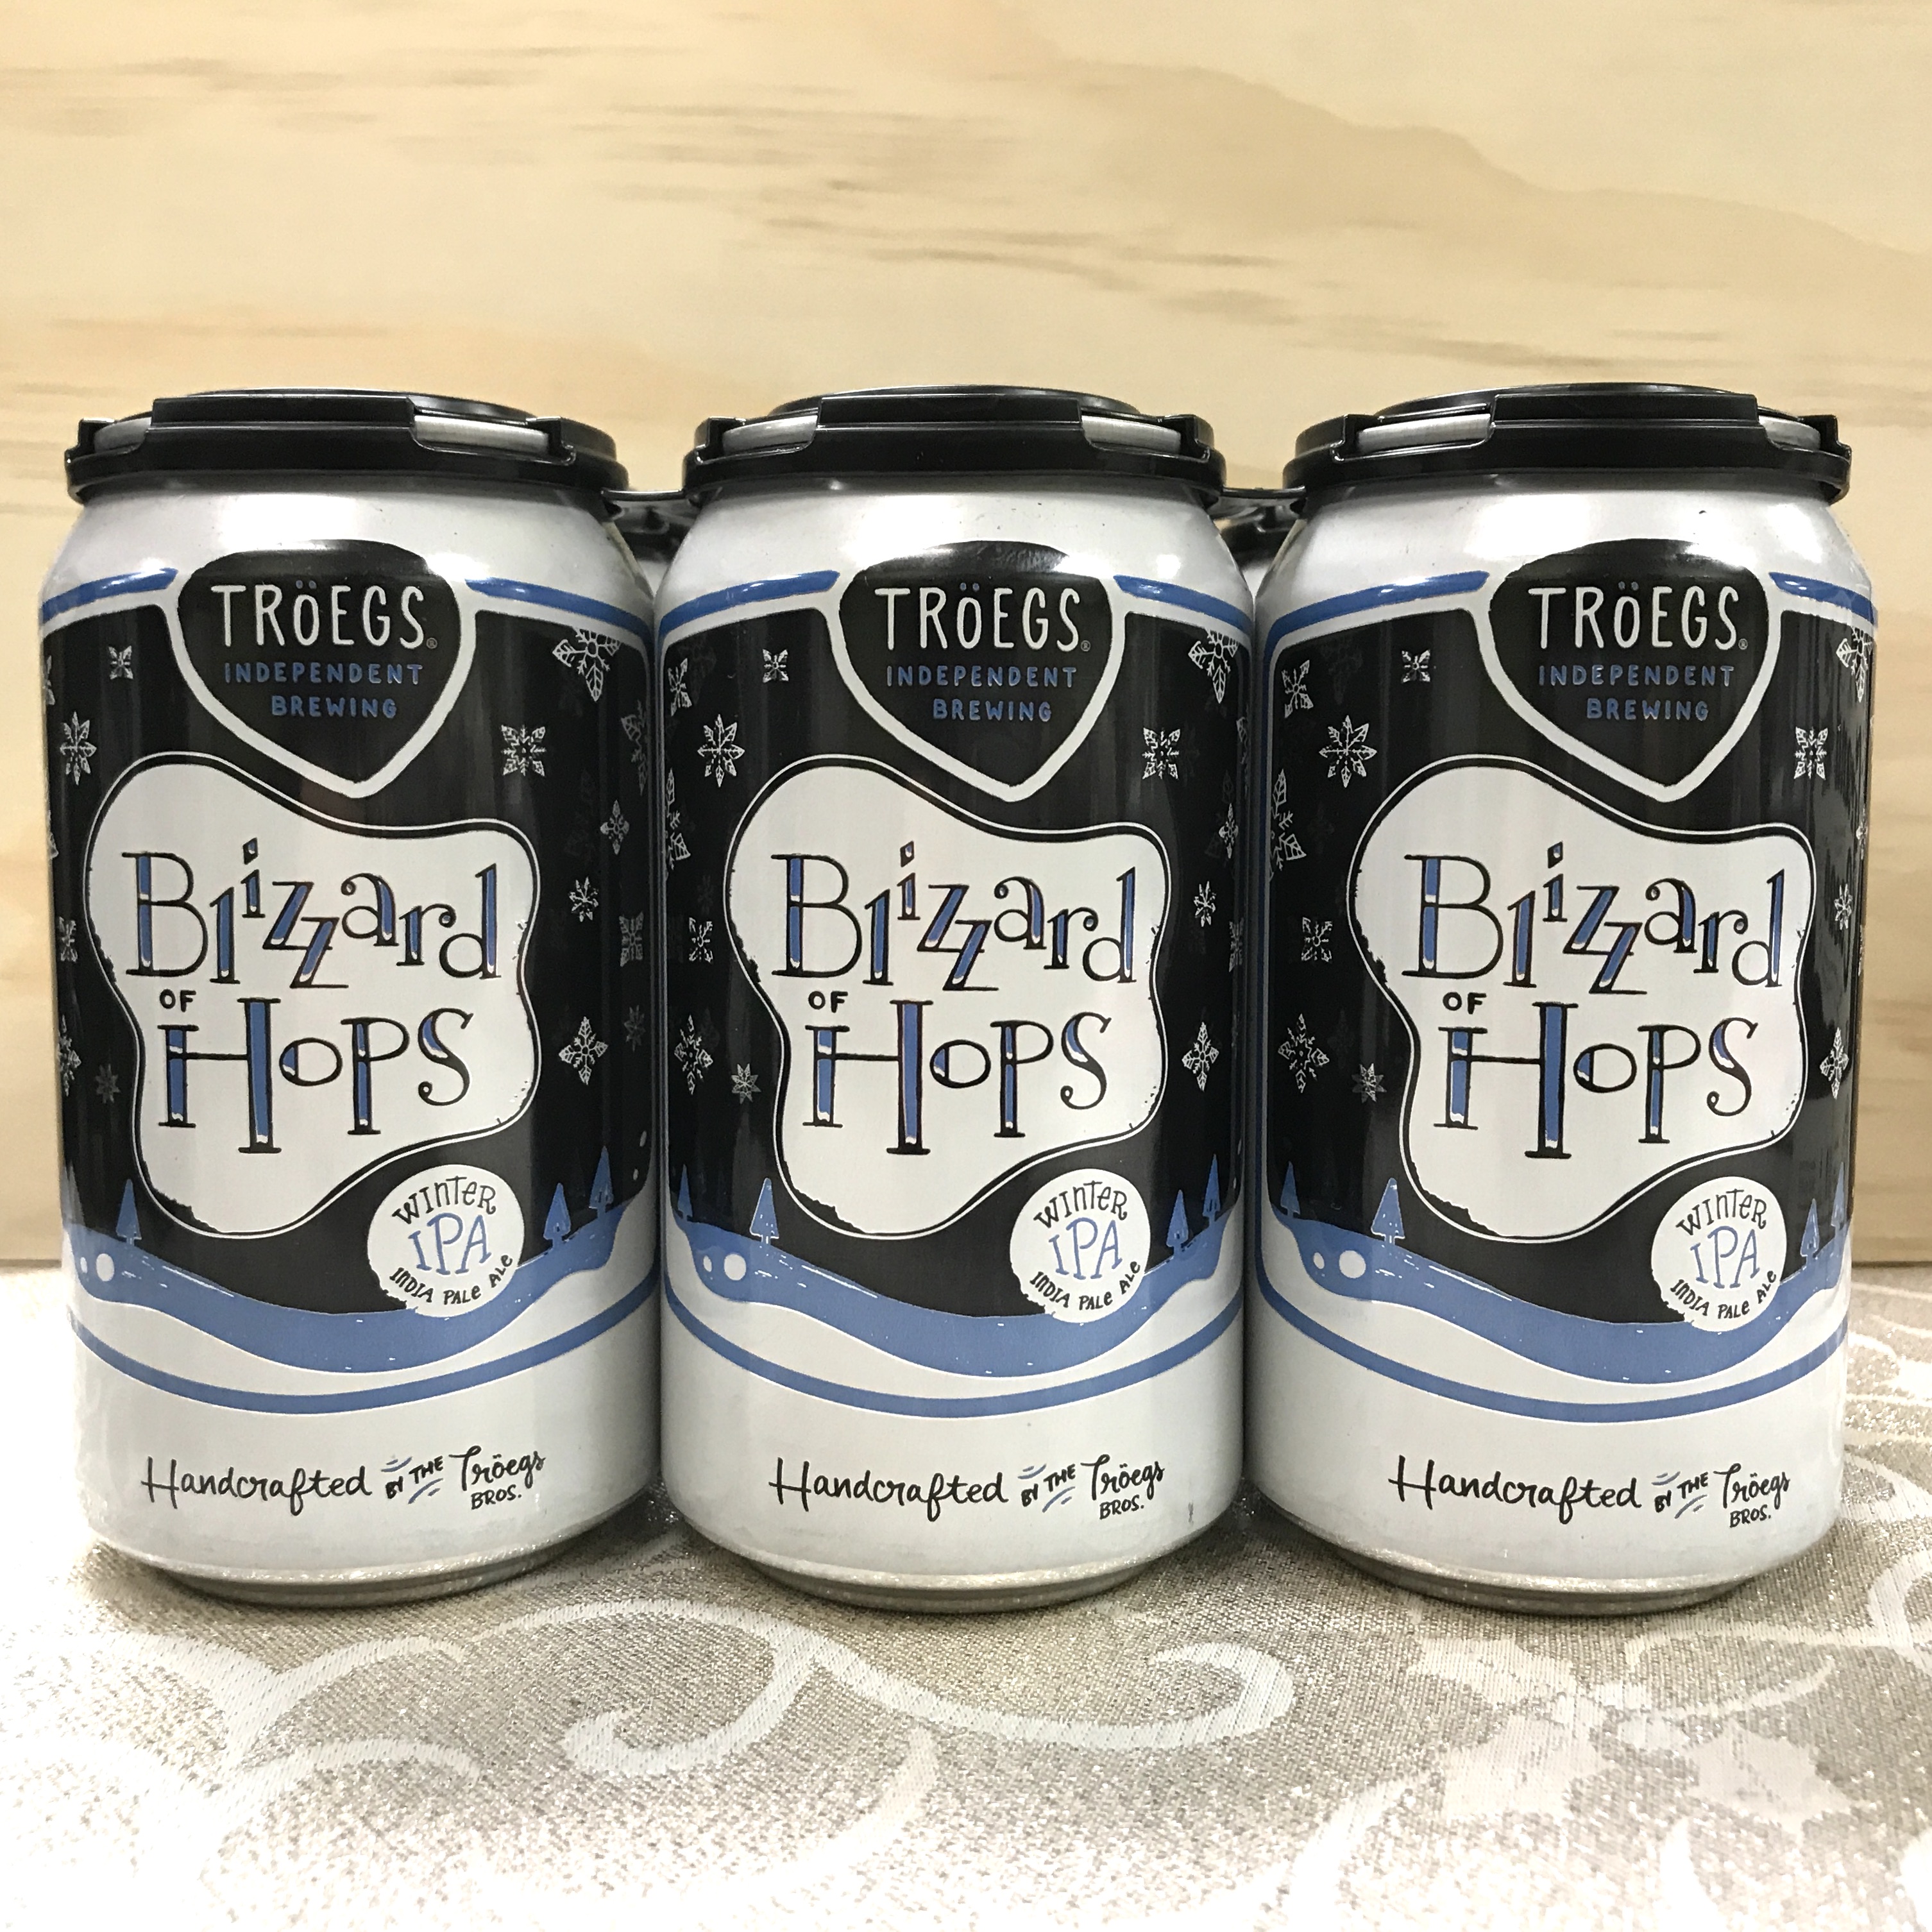 Troegs Blizzard of Hops IPA 6 x 12 oz cans